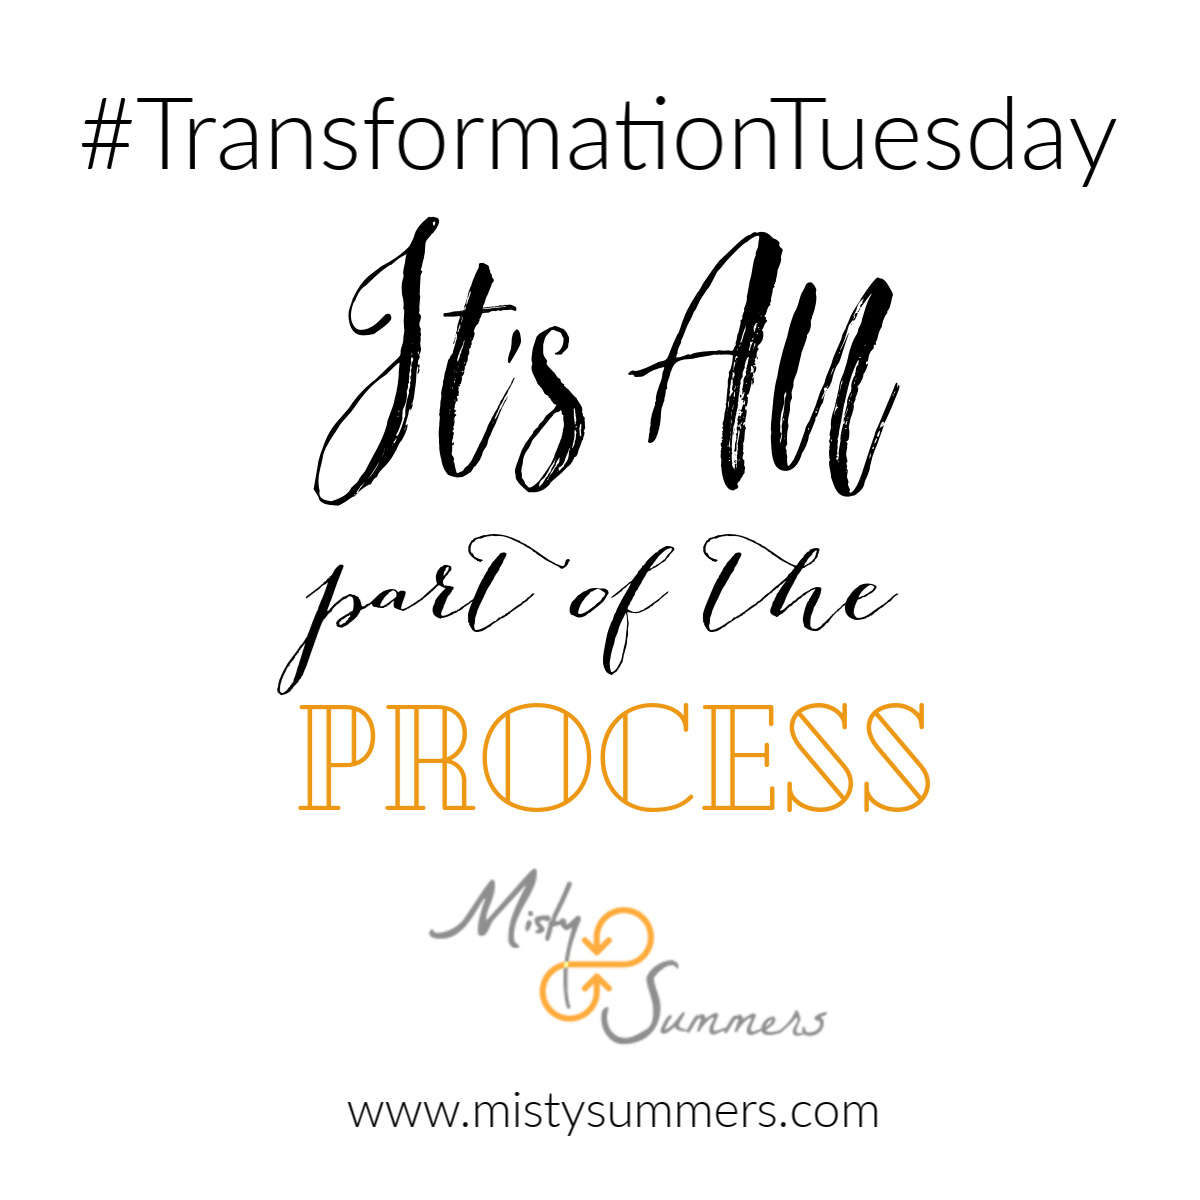 what transformation tuesday means and how to use it